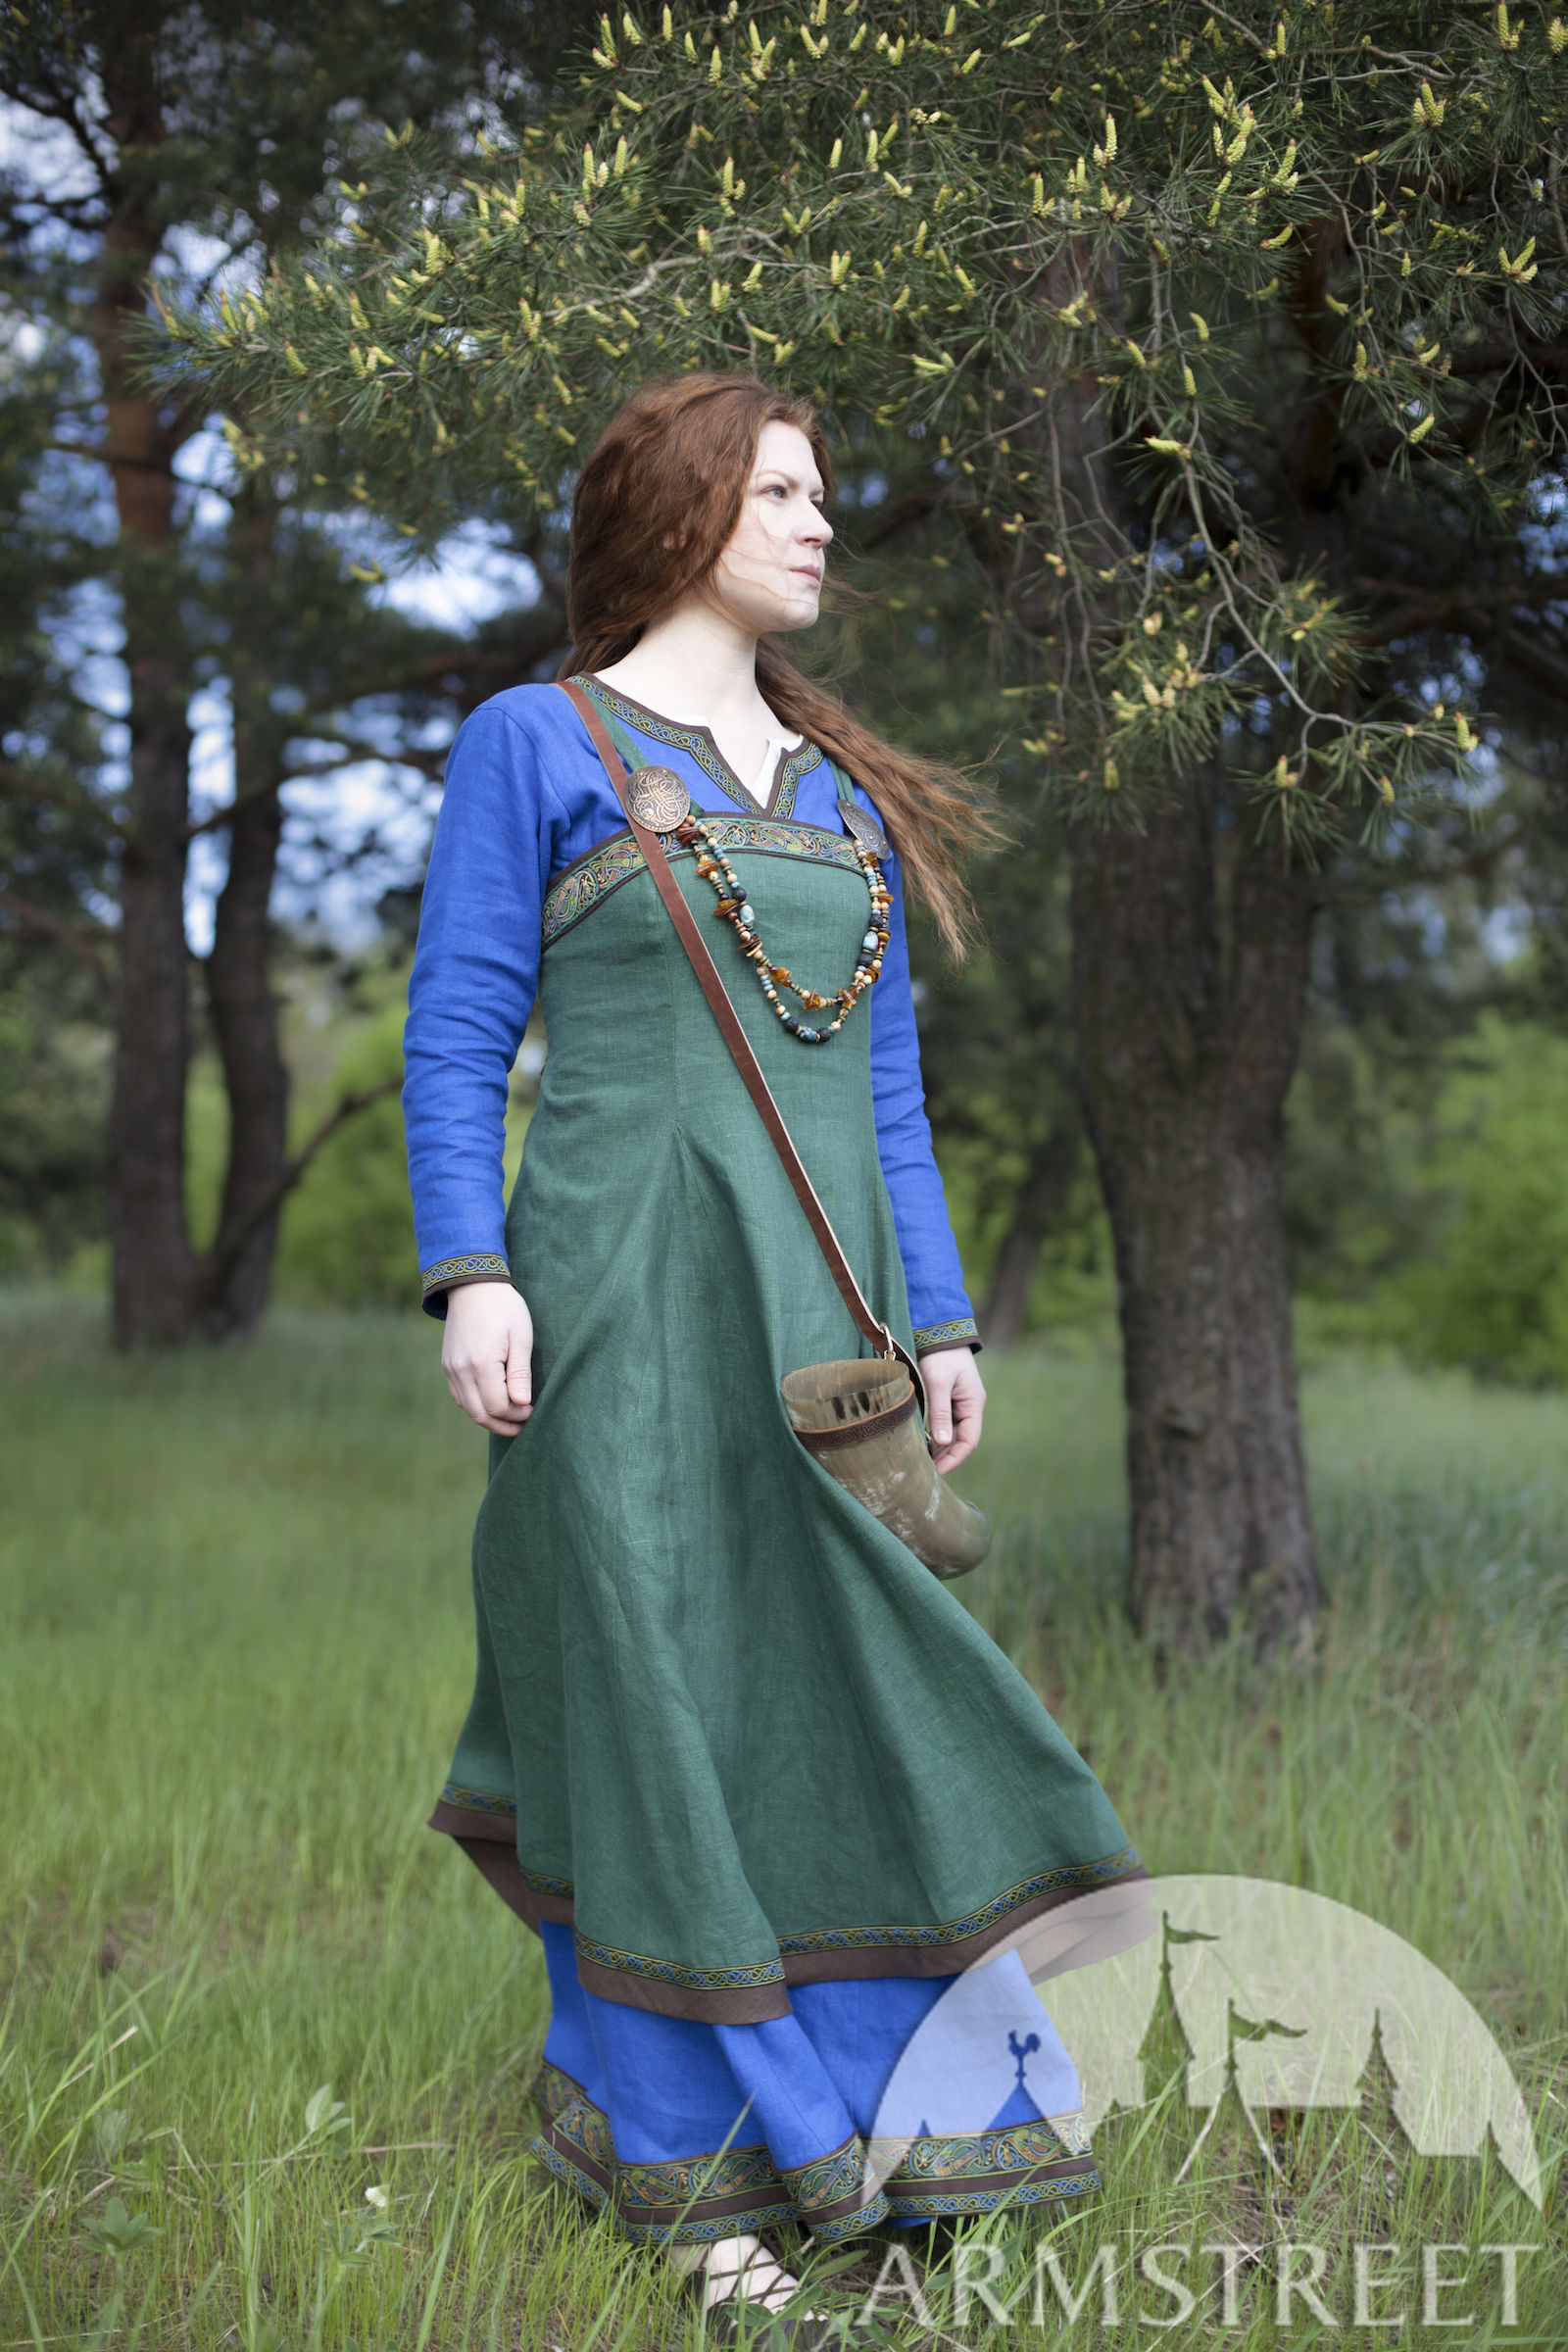 Ancient Viking Dress and Apron "Ingrid the Hearthkeeper". Available in green flax linen, blue